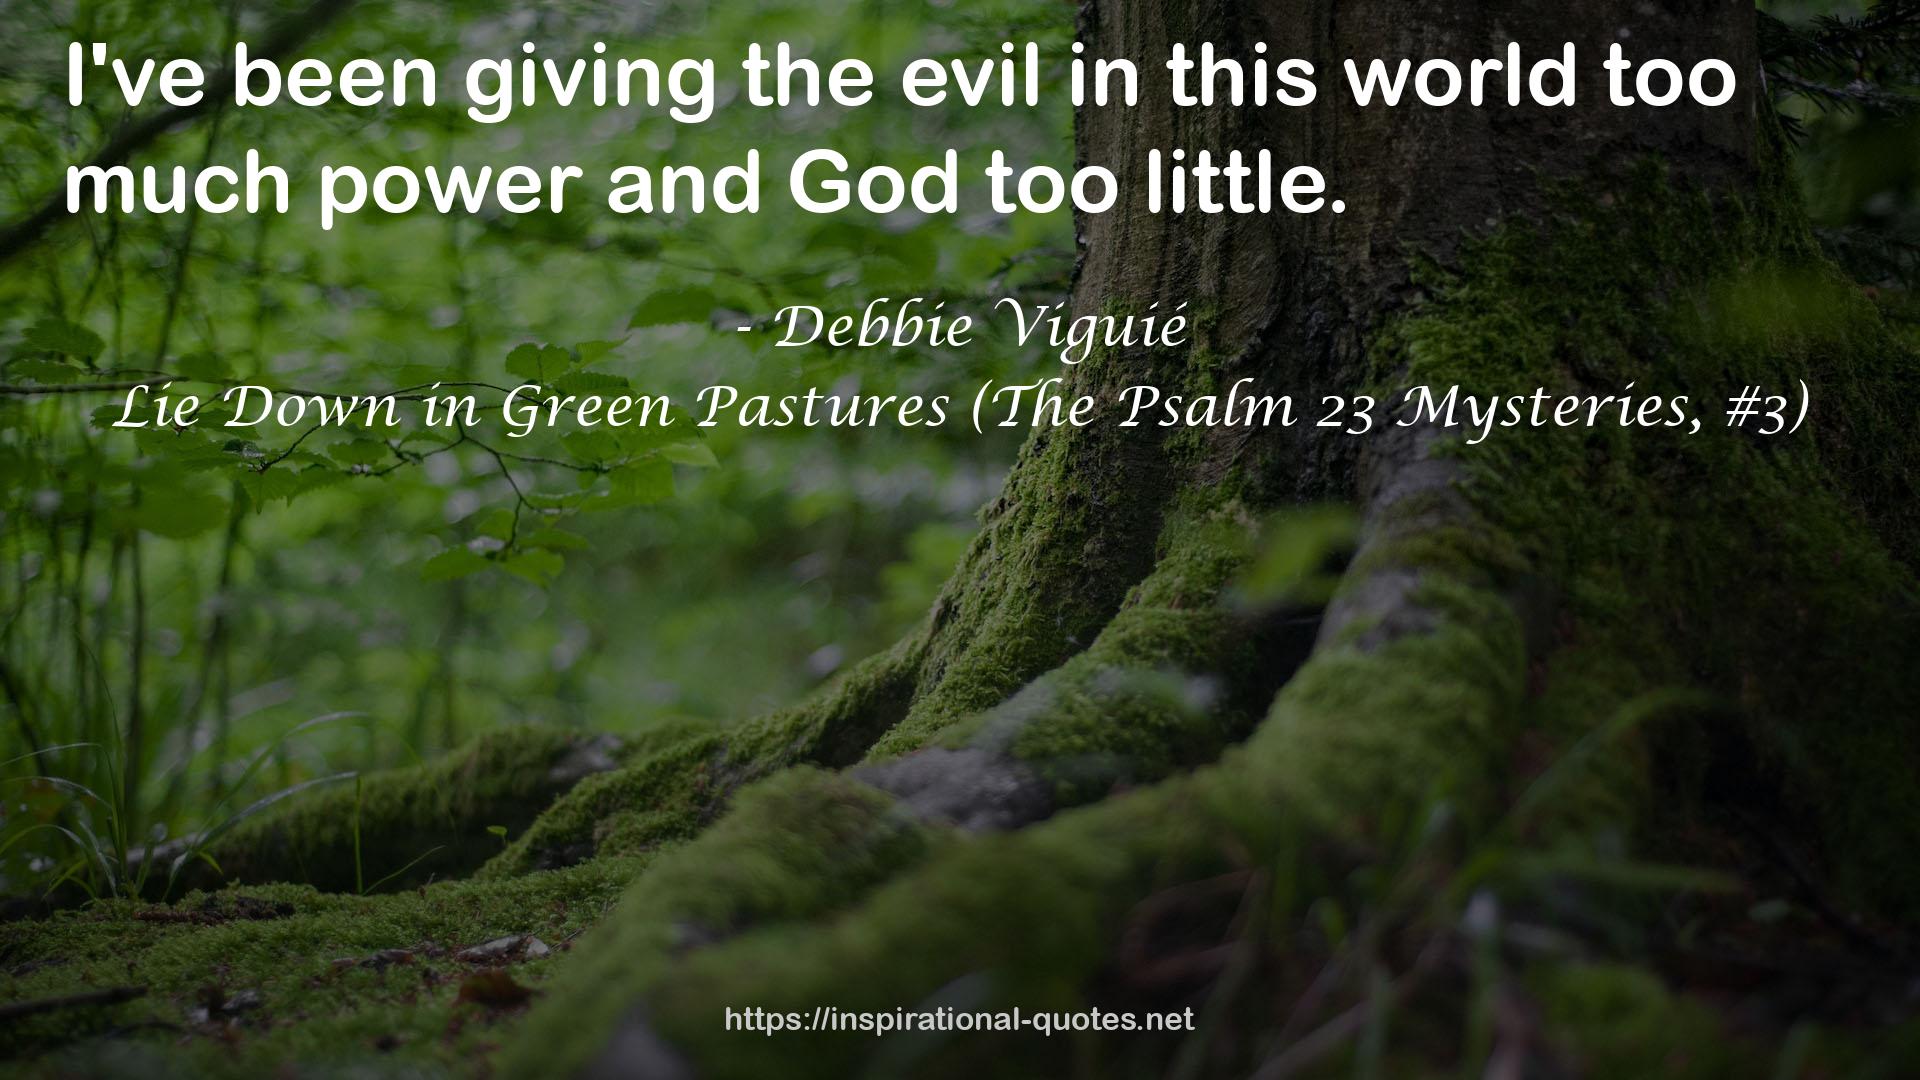 Lie Down in Green Pastures (The Psalm 23 Mysteries, #3) QUOTES